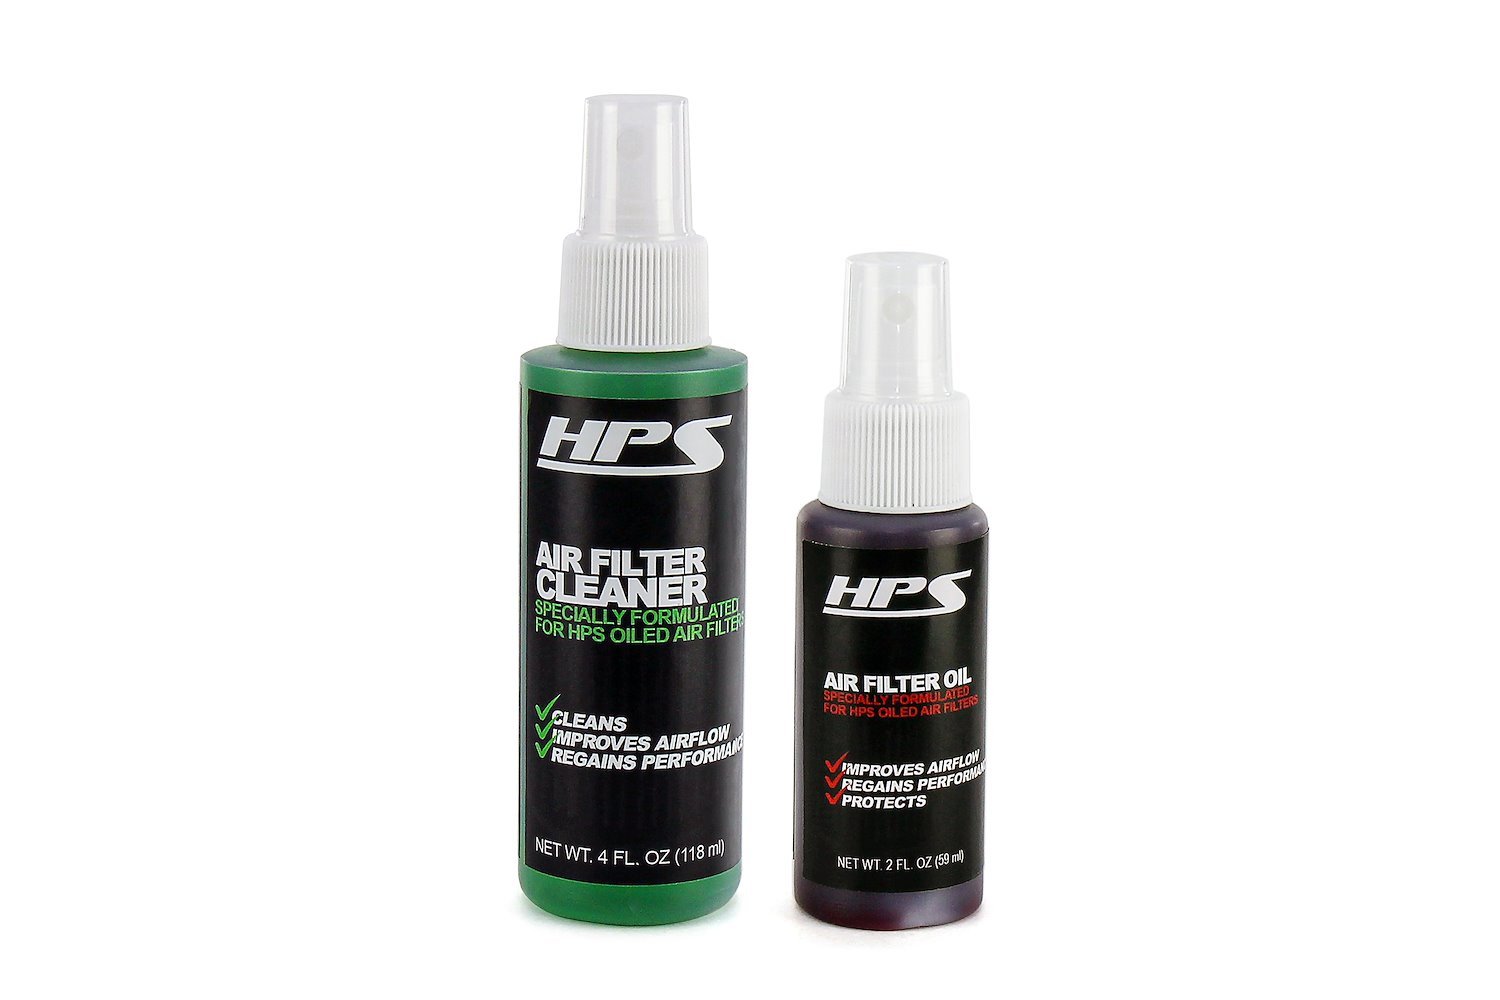 HPS-AFRC Performance Air Filter Cleaning Kit, Cleans & Refreshes Performance Oiled Cotton Air Filters.